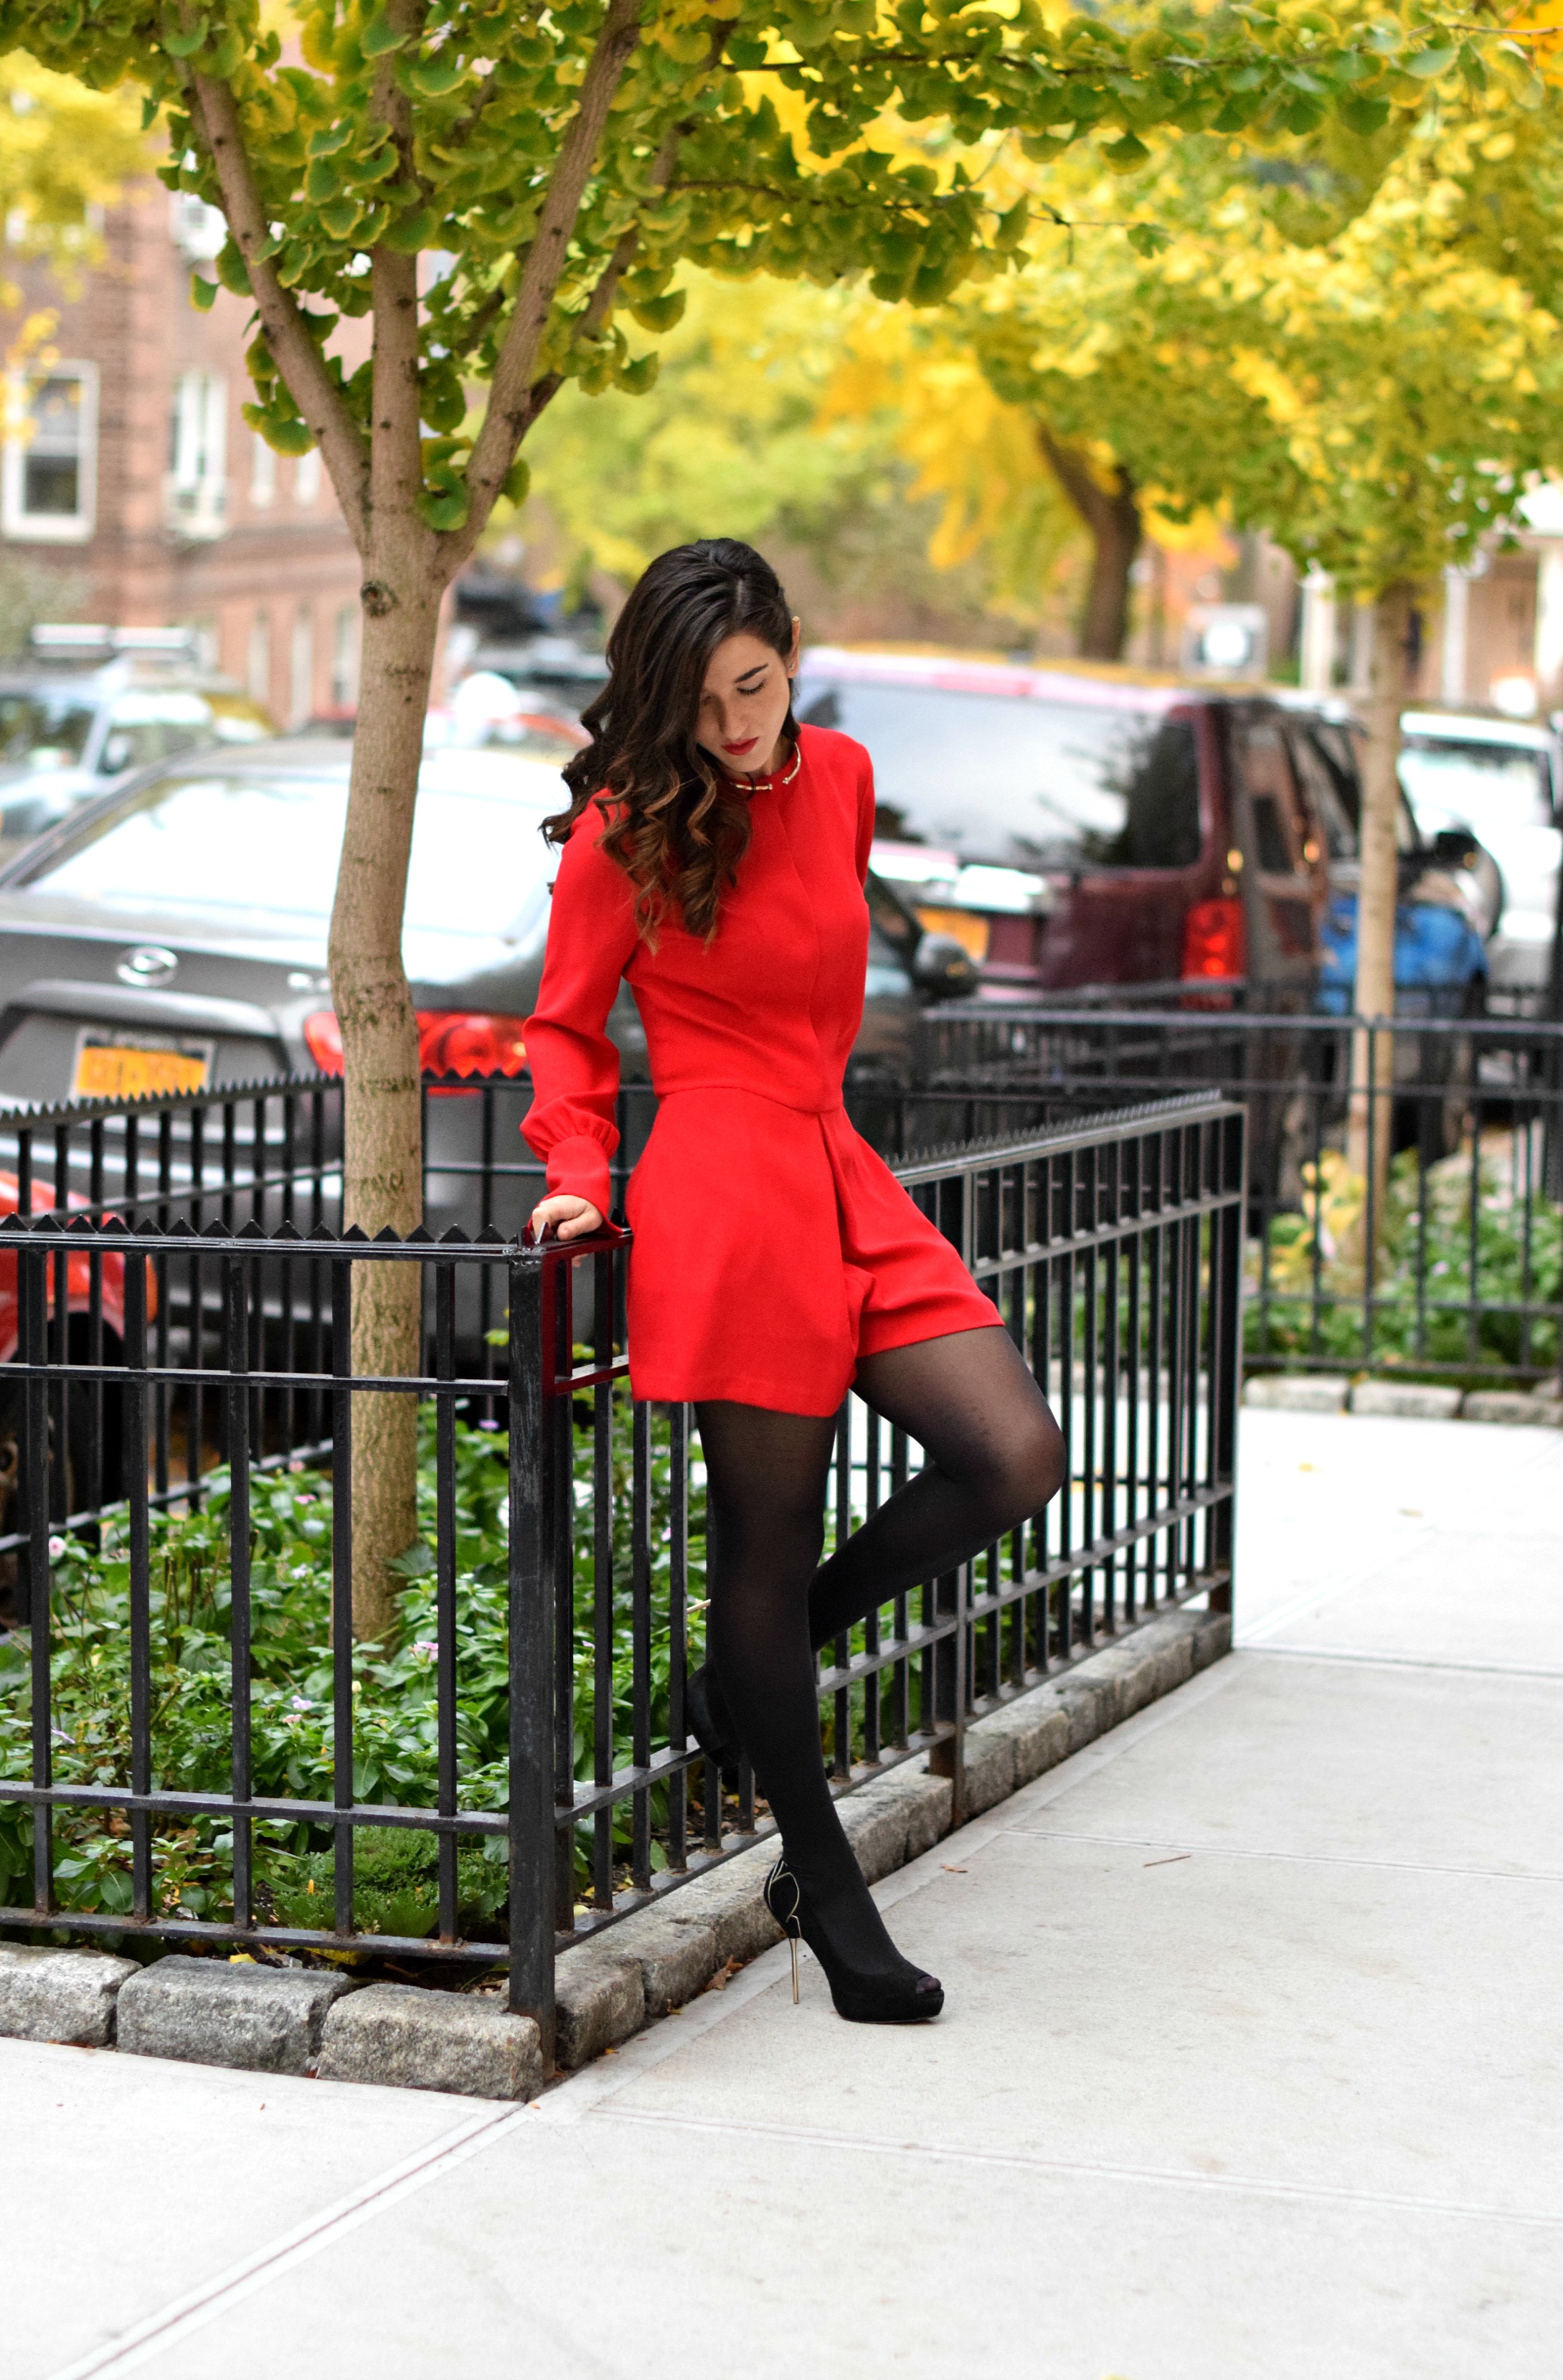 Red Romper Black Tights Louboutins & Love Fashion Blog Esther Santer NYC Street Style Blogger Winter Fall Look Shoes Zara Heels Gold Collar Necklace Braid Hair Inspo Outfit OOTD Photoshoot NYC Girl Women Stiletto Wear Shop  Clothing Model Accessories.jpg